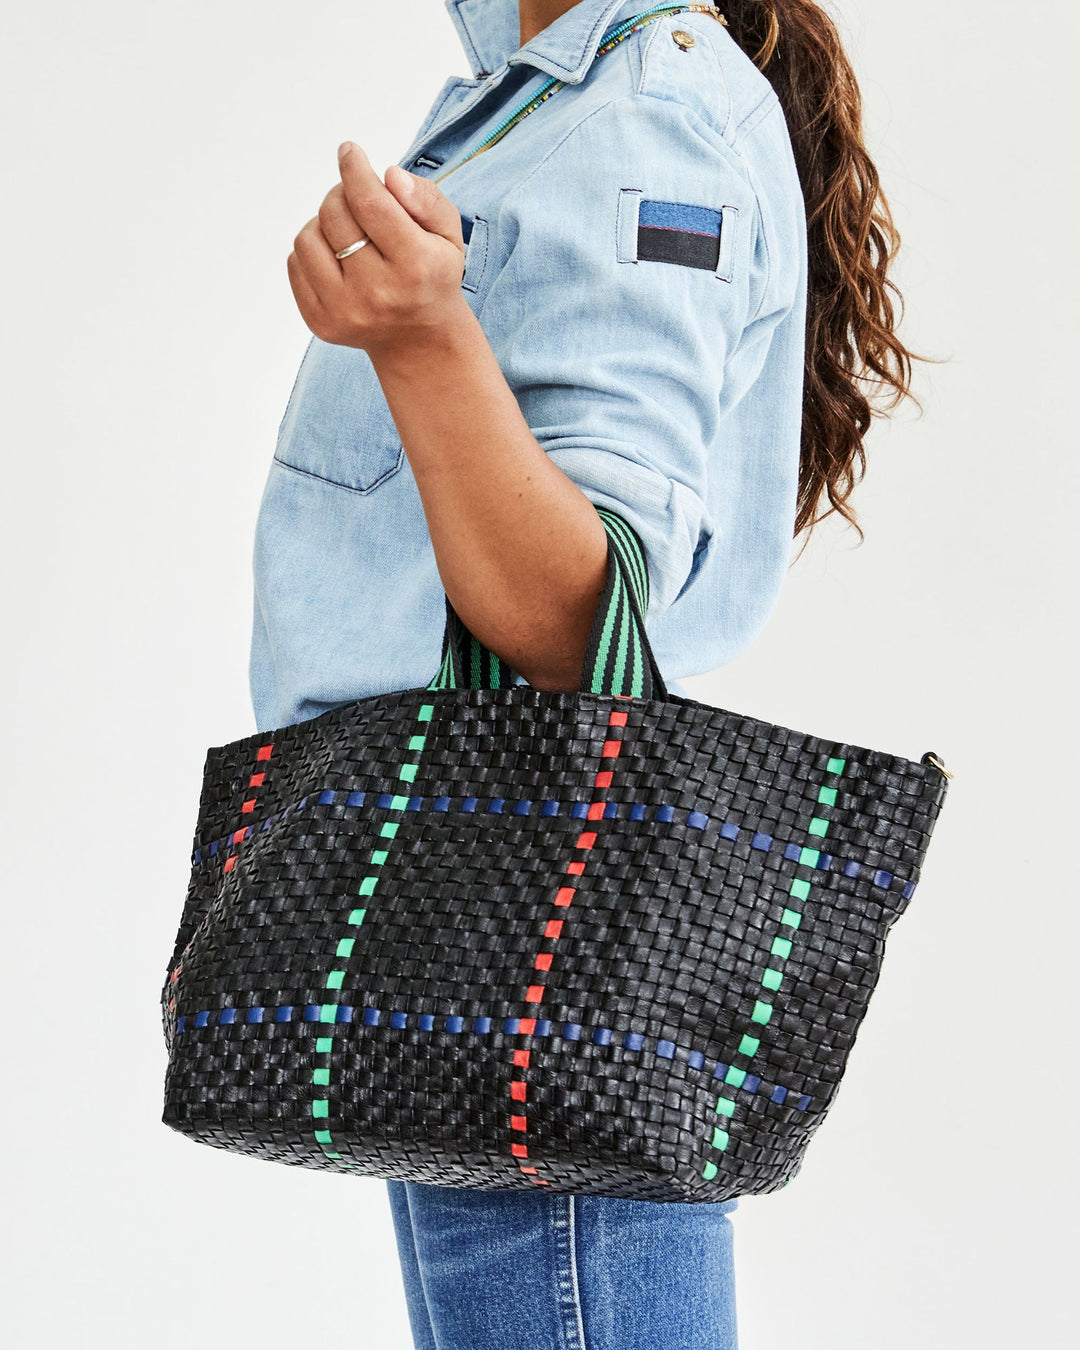 Clare V. - Bateau Tote in Black w/ Pacific, Cherry Red & Parrot Green Plaid Woven Checker